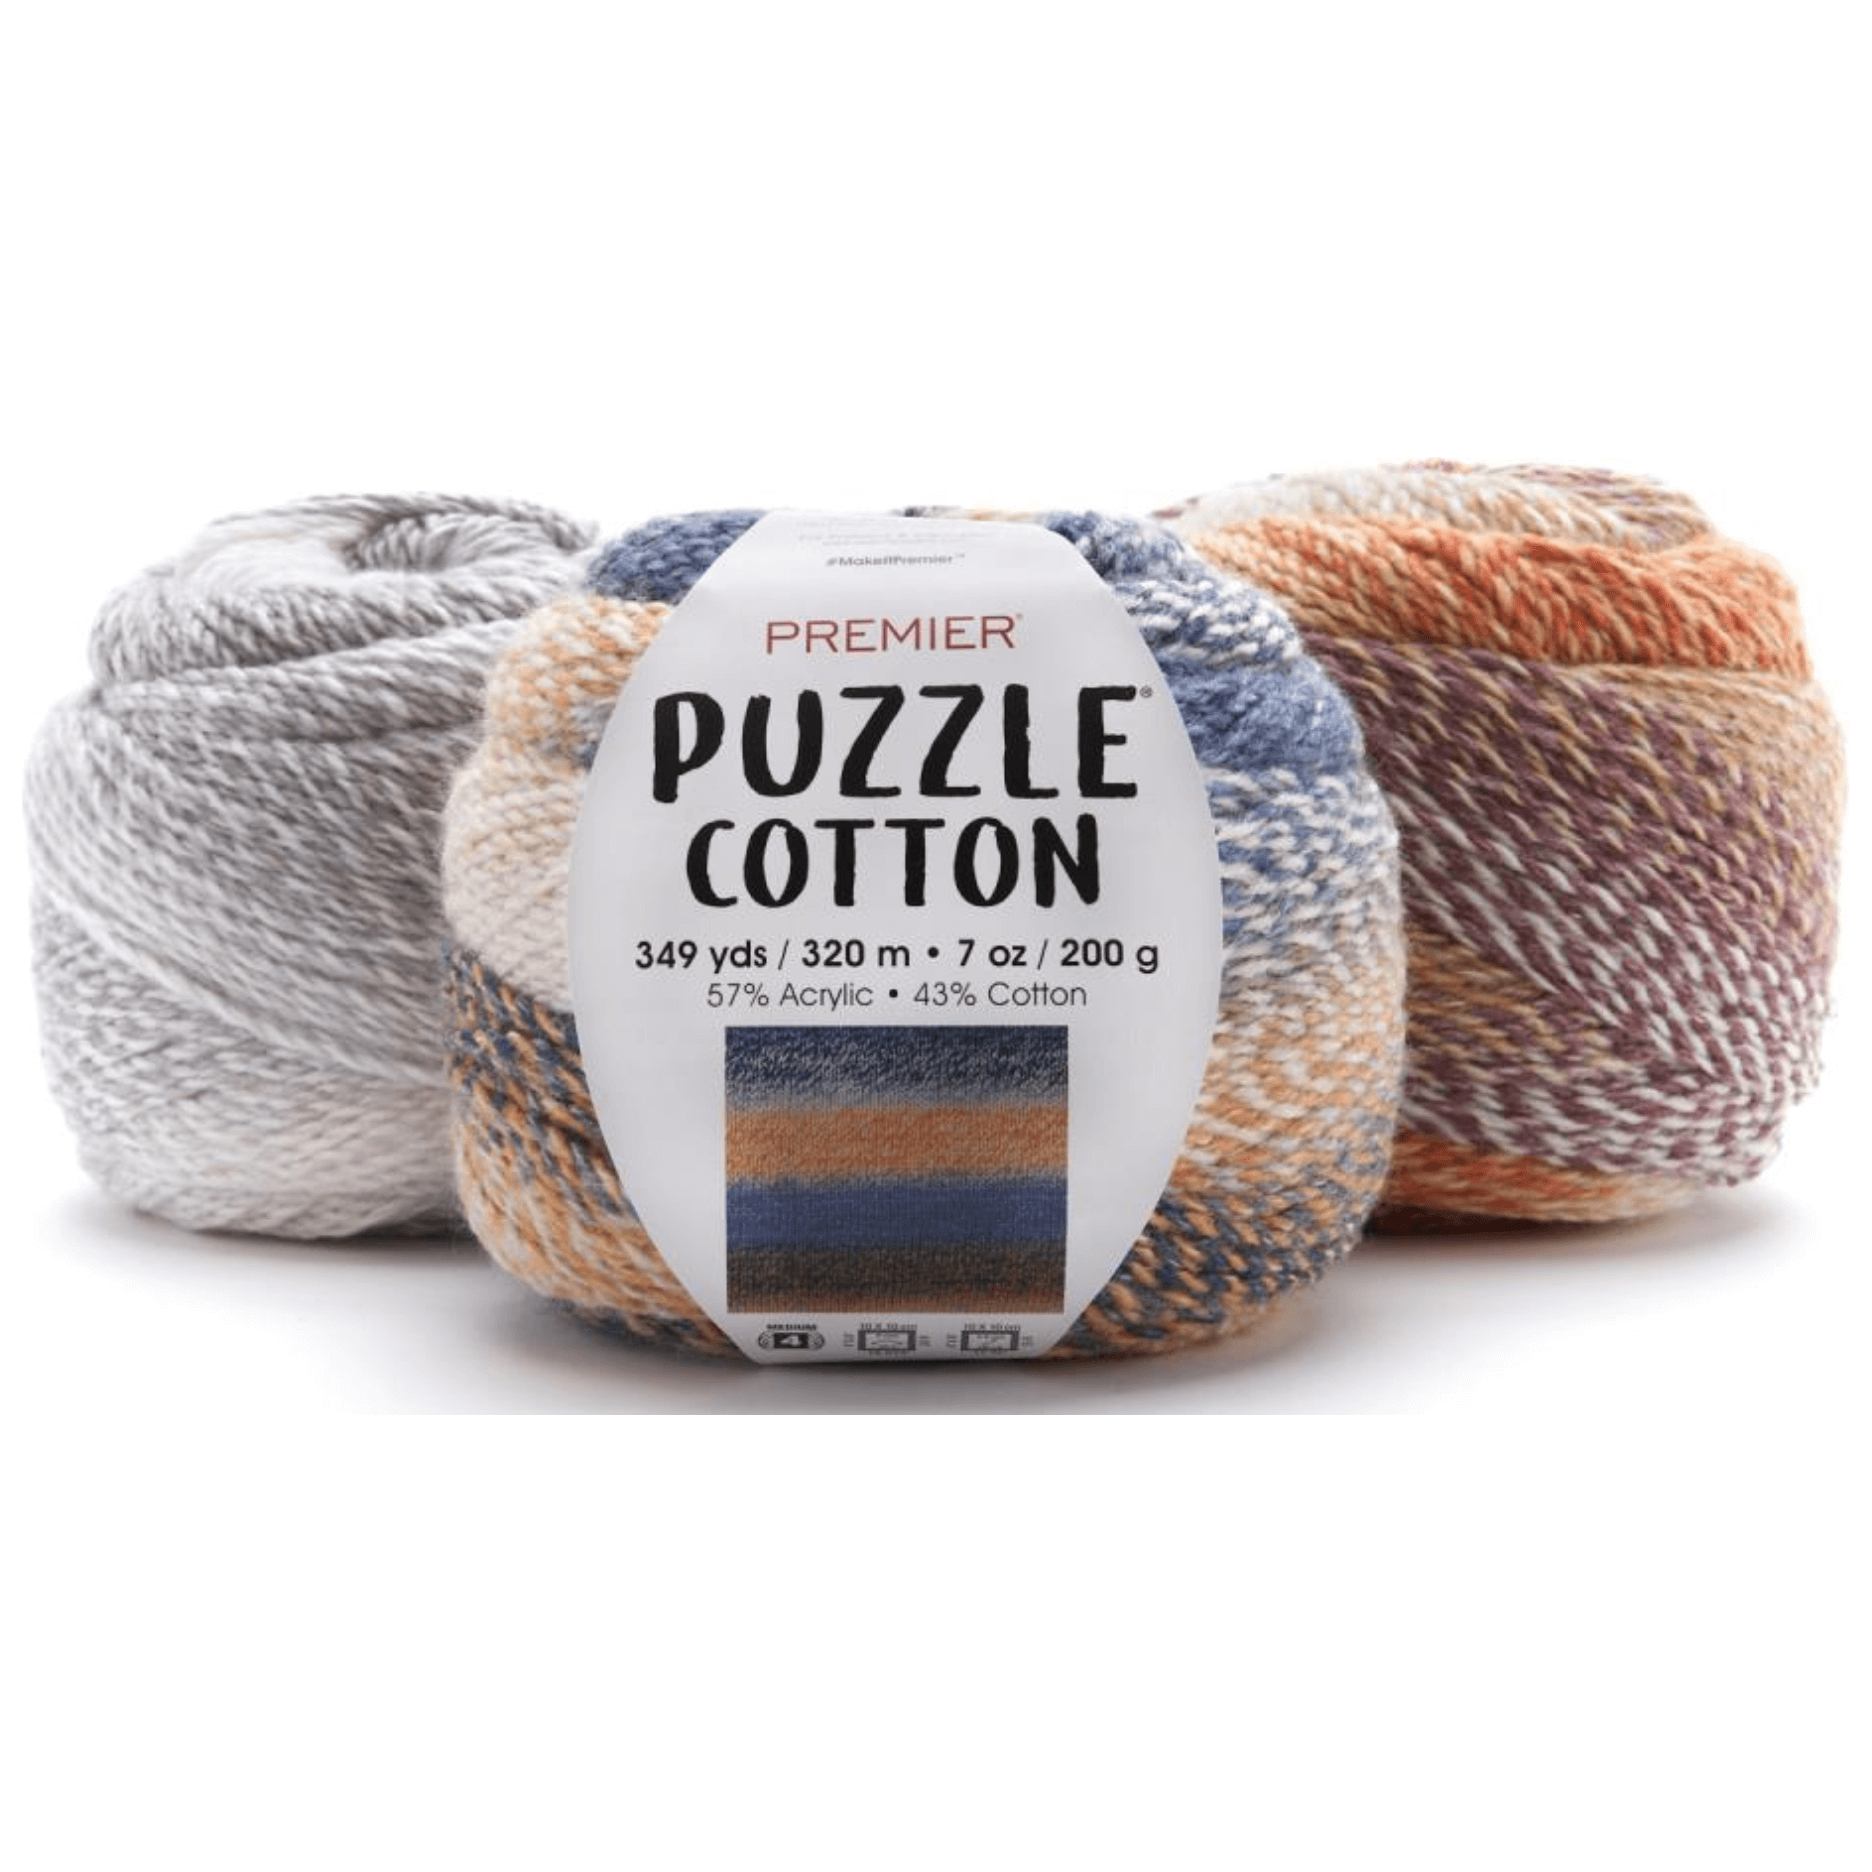 Premier Puzzle Cotton Yarn Sold As A 3 Pack